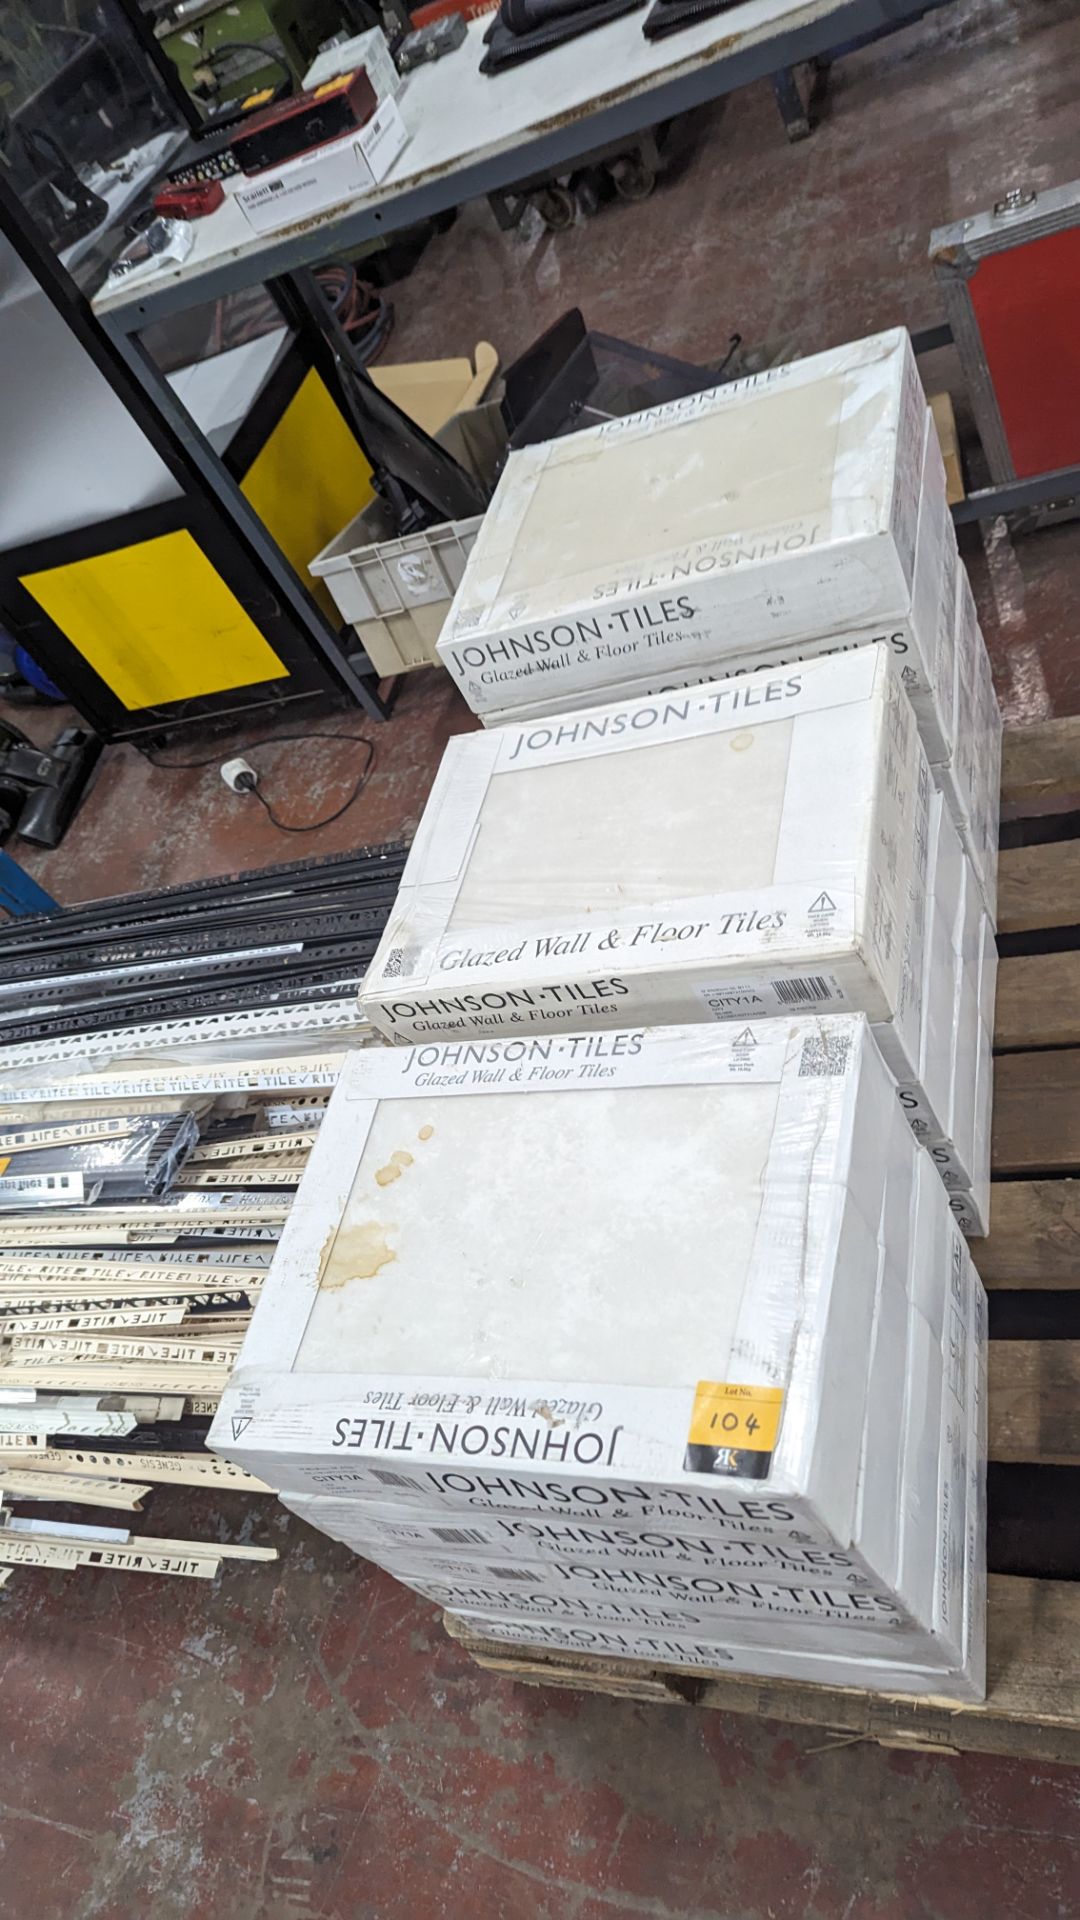 16 packs of Johnson glazed wall and floor tiles, each pack contains 5 tiles. Each tile measures 397m - Image 5 of 6